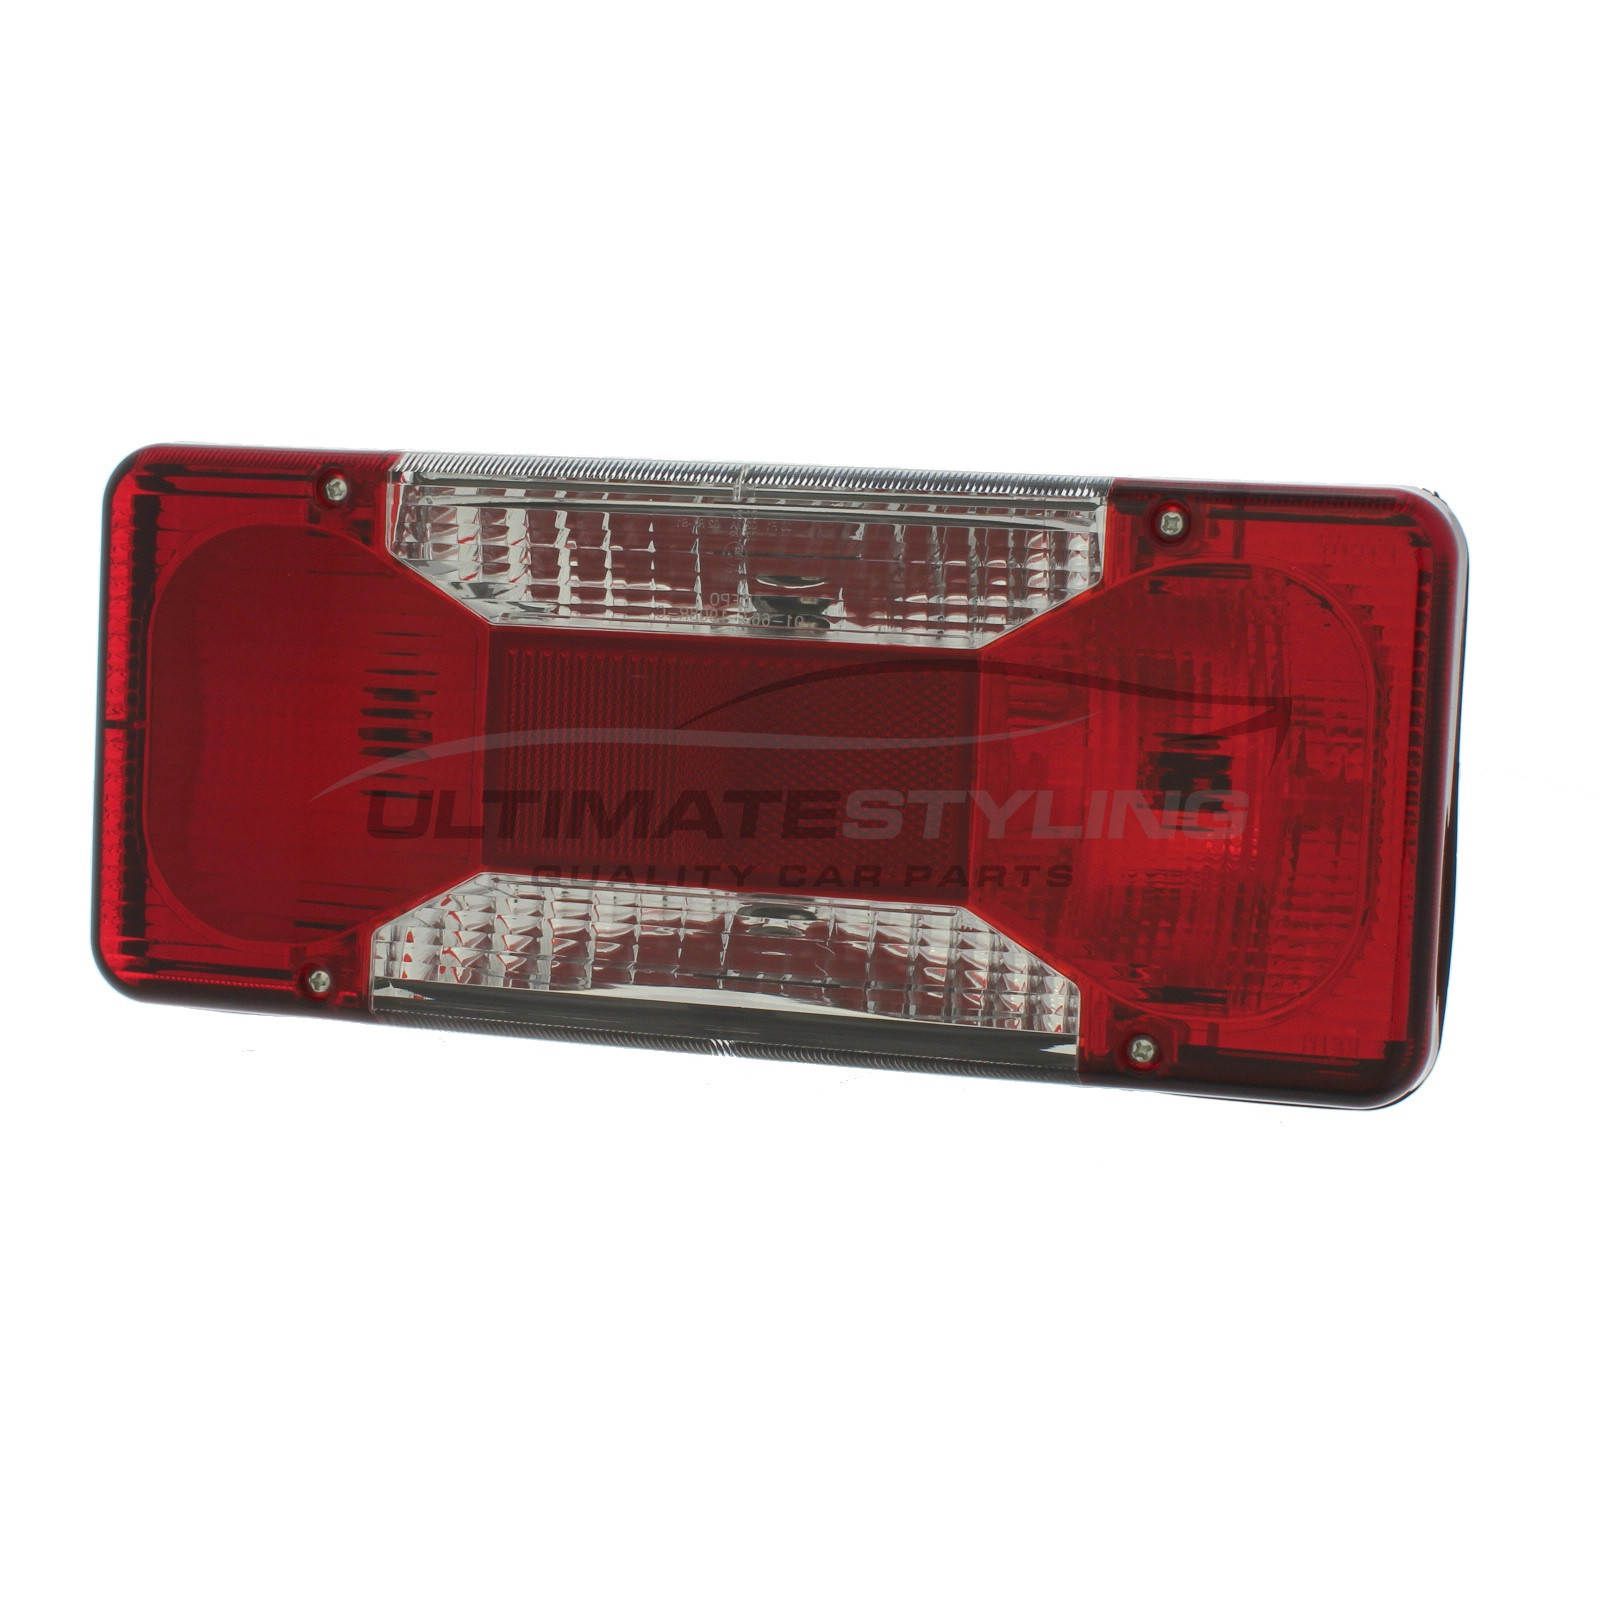 Fiat Doblo, Iveco Daily Rear Light / Tail Light - Complete - Passenger Side (LH), Rear - Non-LED